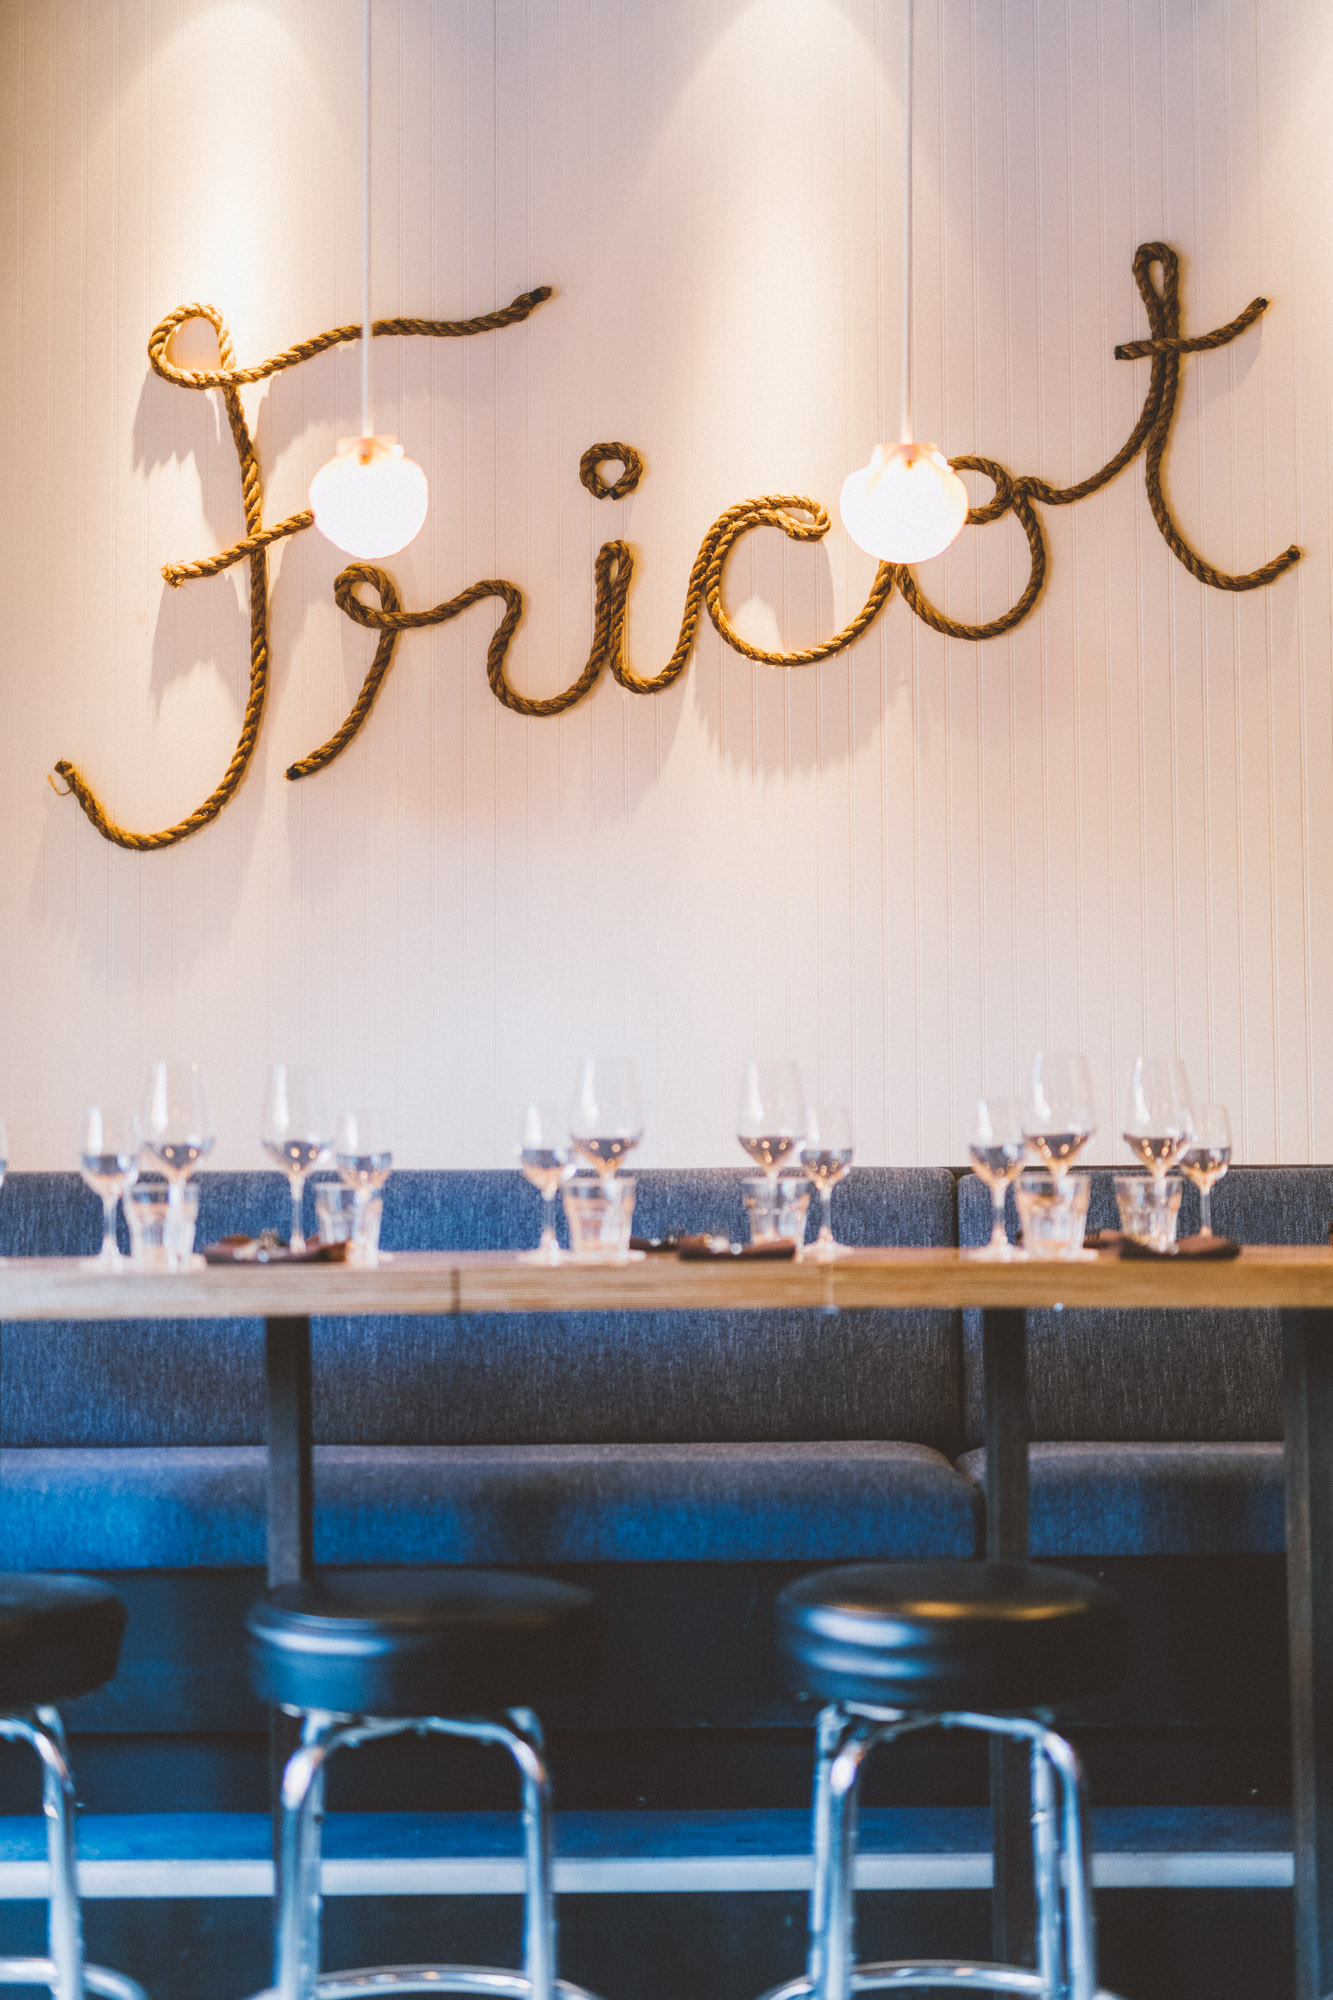 Le Fricot - Design d'intérieur - Restaurant - Montreal - Jeff On The Road - All photos are under Copyright  © 2019 Jeff Frenette Photography / dezjeff. To use the photos, please contact me at dezjeff@me.com.